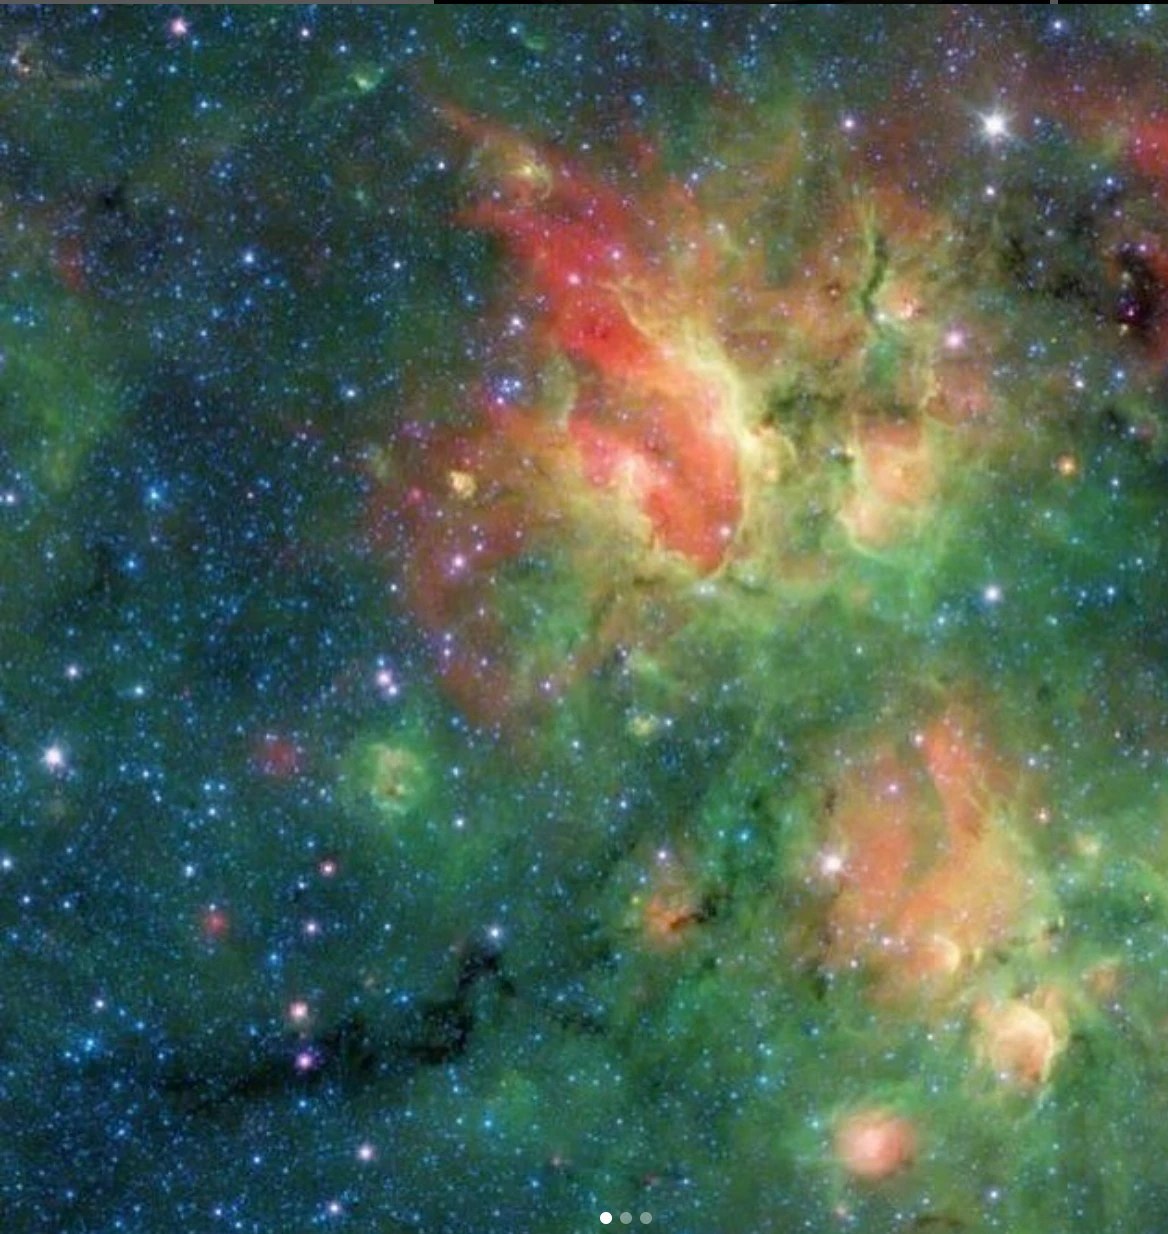 The image of cloudy nebulae was captured by Spitzer Space Telescope